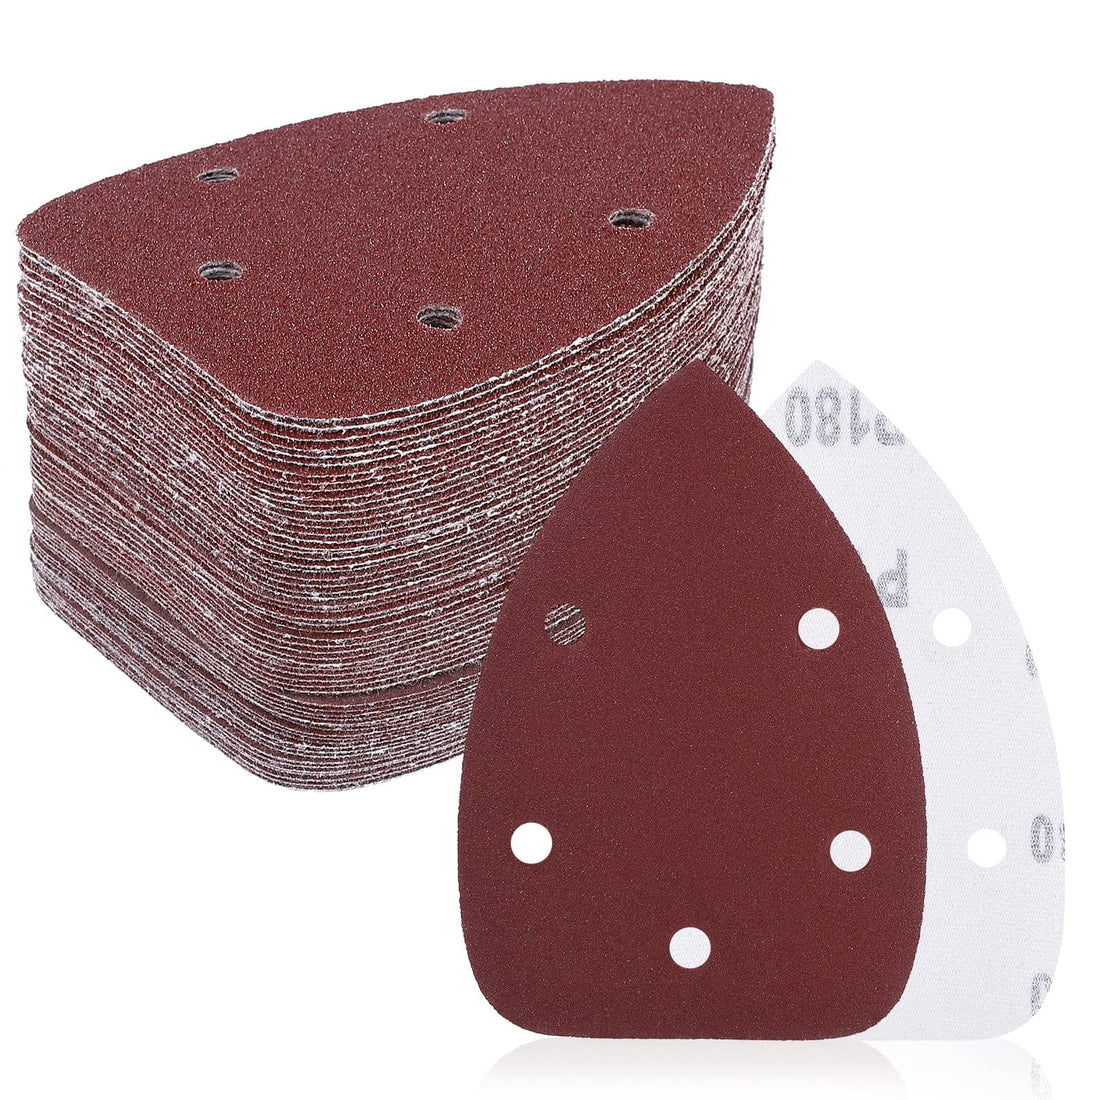 60 Grit Sanding Pads for Mouse Sanders